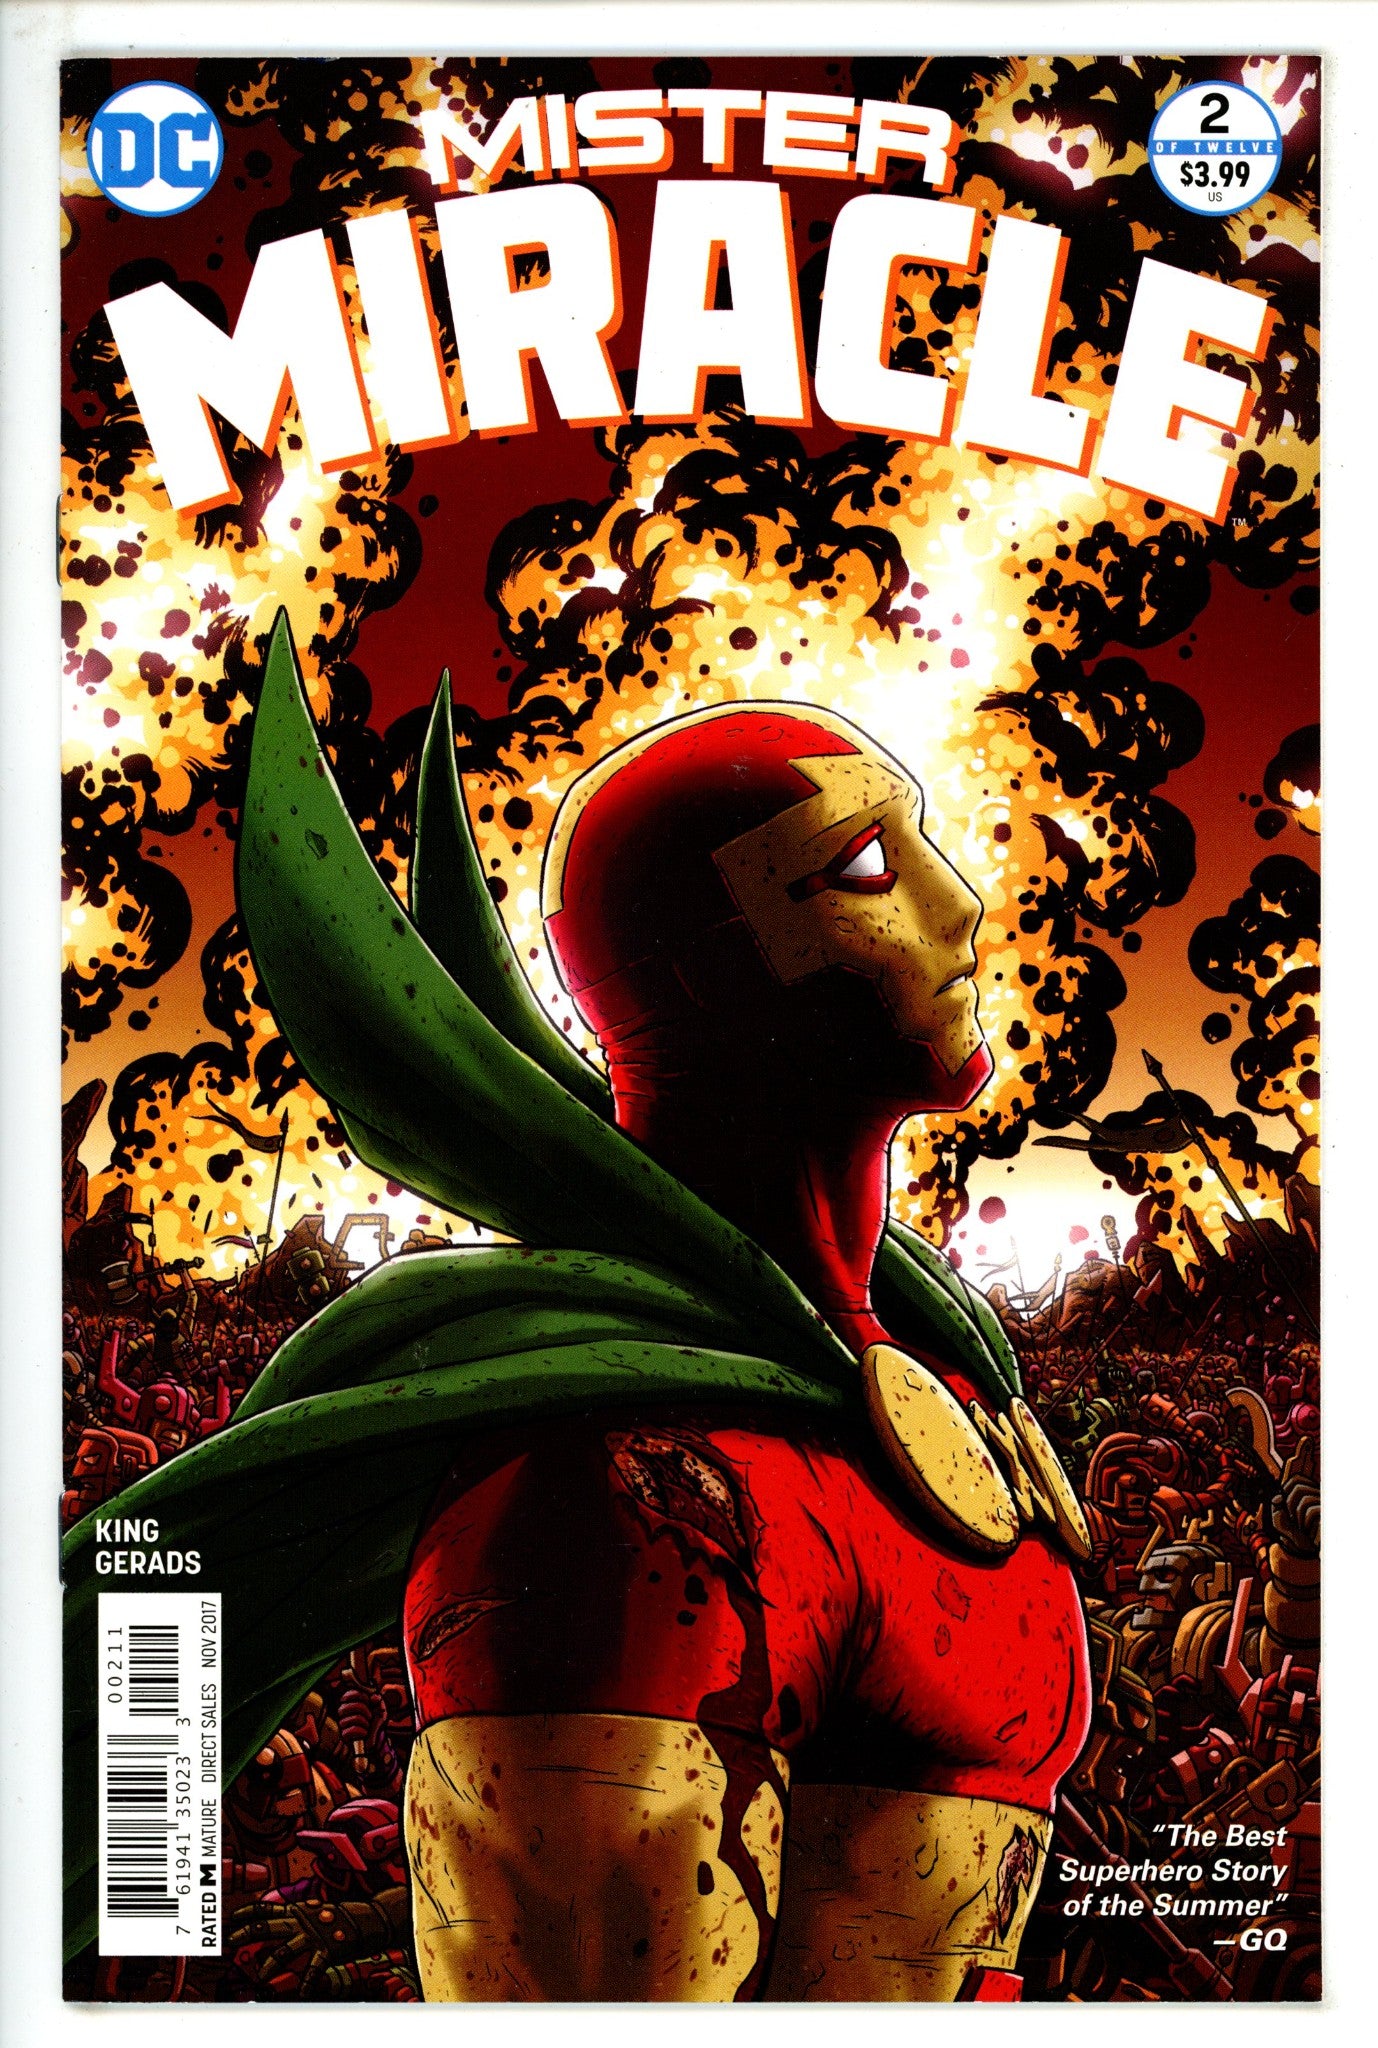 Mister Miracle Vol 4 2 High Grade (2017) 